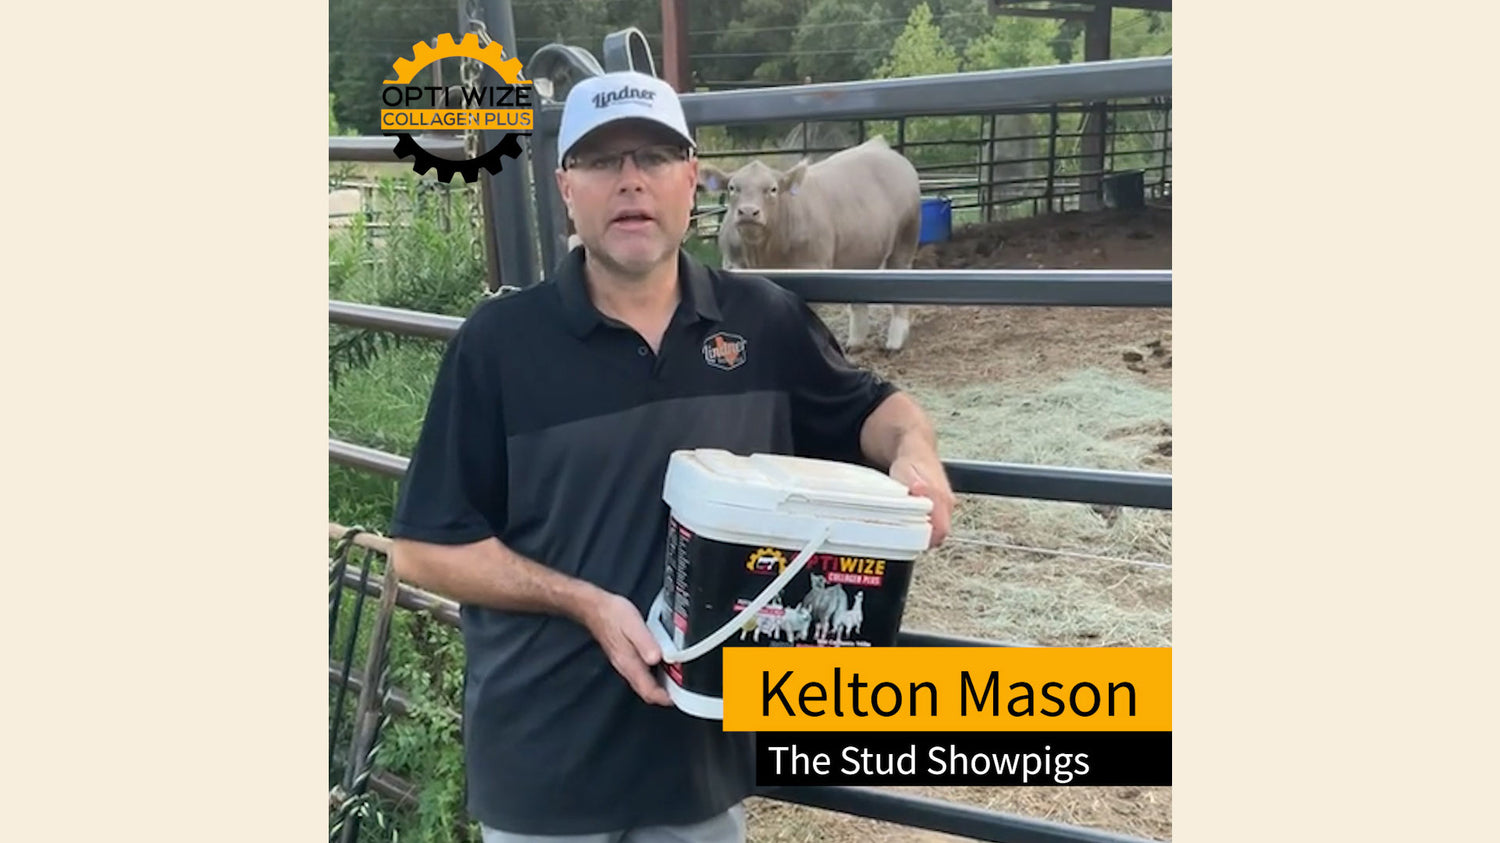 <p>Kelton Mason talks about show cattle and pigs with the use of OptiWize Collagen Plus. Kelton shares how OptiWize helped increase range of motion in his cattle as well as helped stop popping pasterns. OptiWize is his go to joint supplement for cattle and pigs.</p>